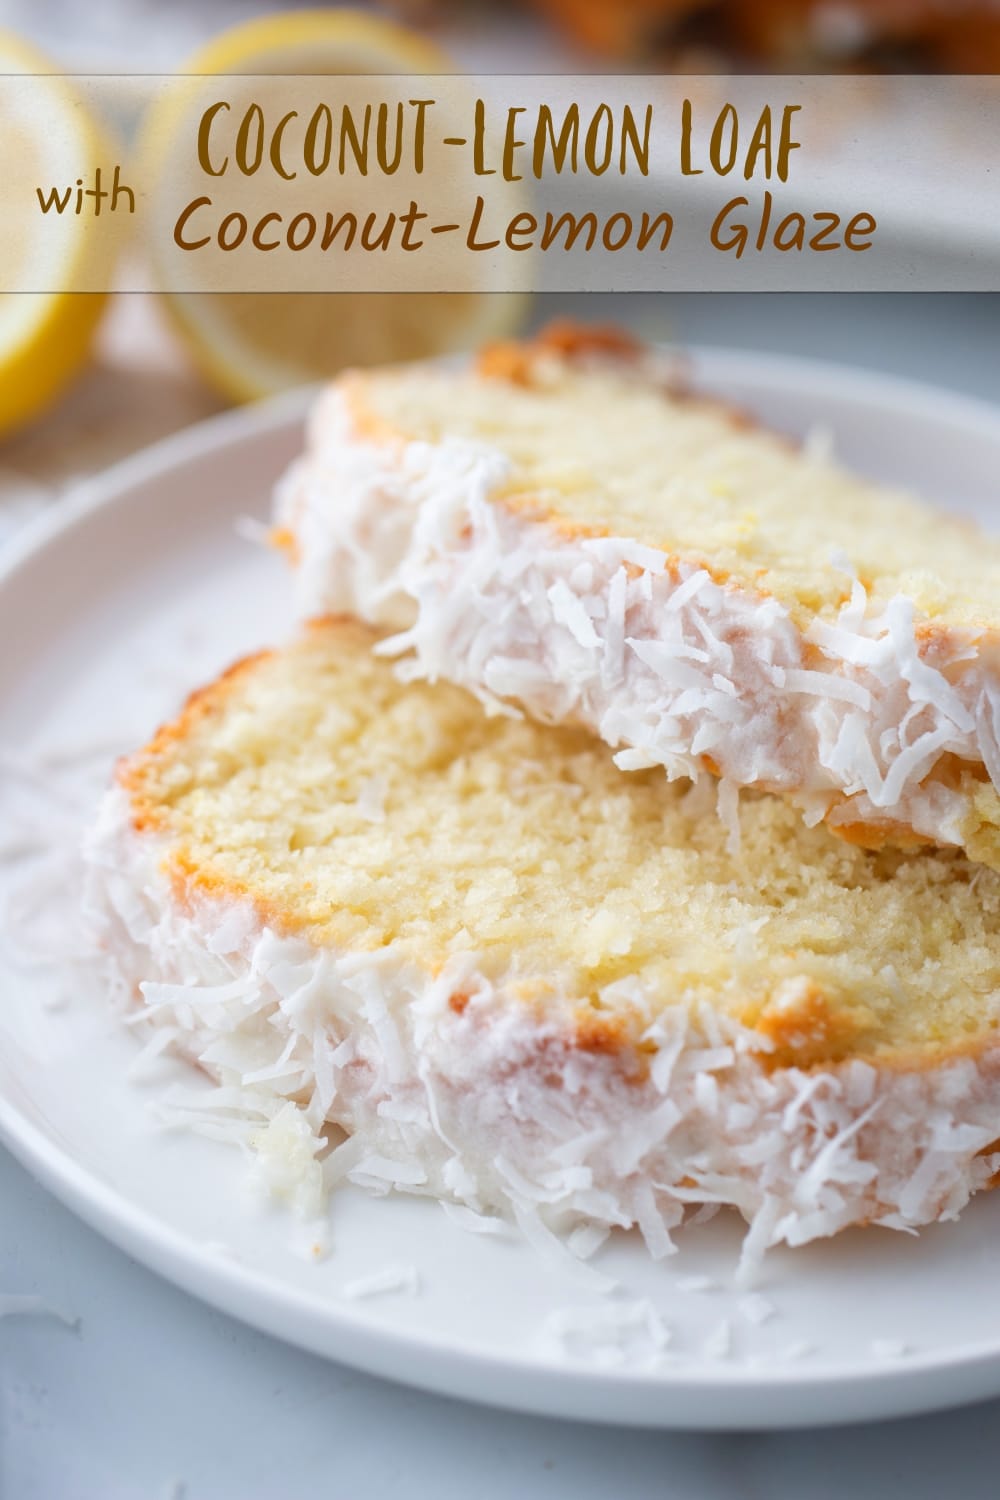 Coconut-Lemon Loaf with Coconut Lemon Glaze is an exceptionally moist, tender, and delicate cake with a kick of zesty lemon and coconut flavor. The classic combo of coconut and lemon makes it a go-to for slicing throughout the week. It's also a great treat to wrap up and gift to friends, family, and neighbors, suitable for any occasion or holiday. via @cmpollak1